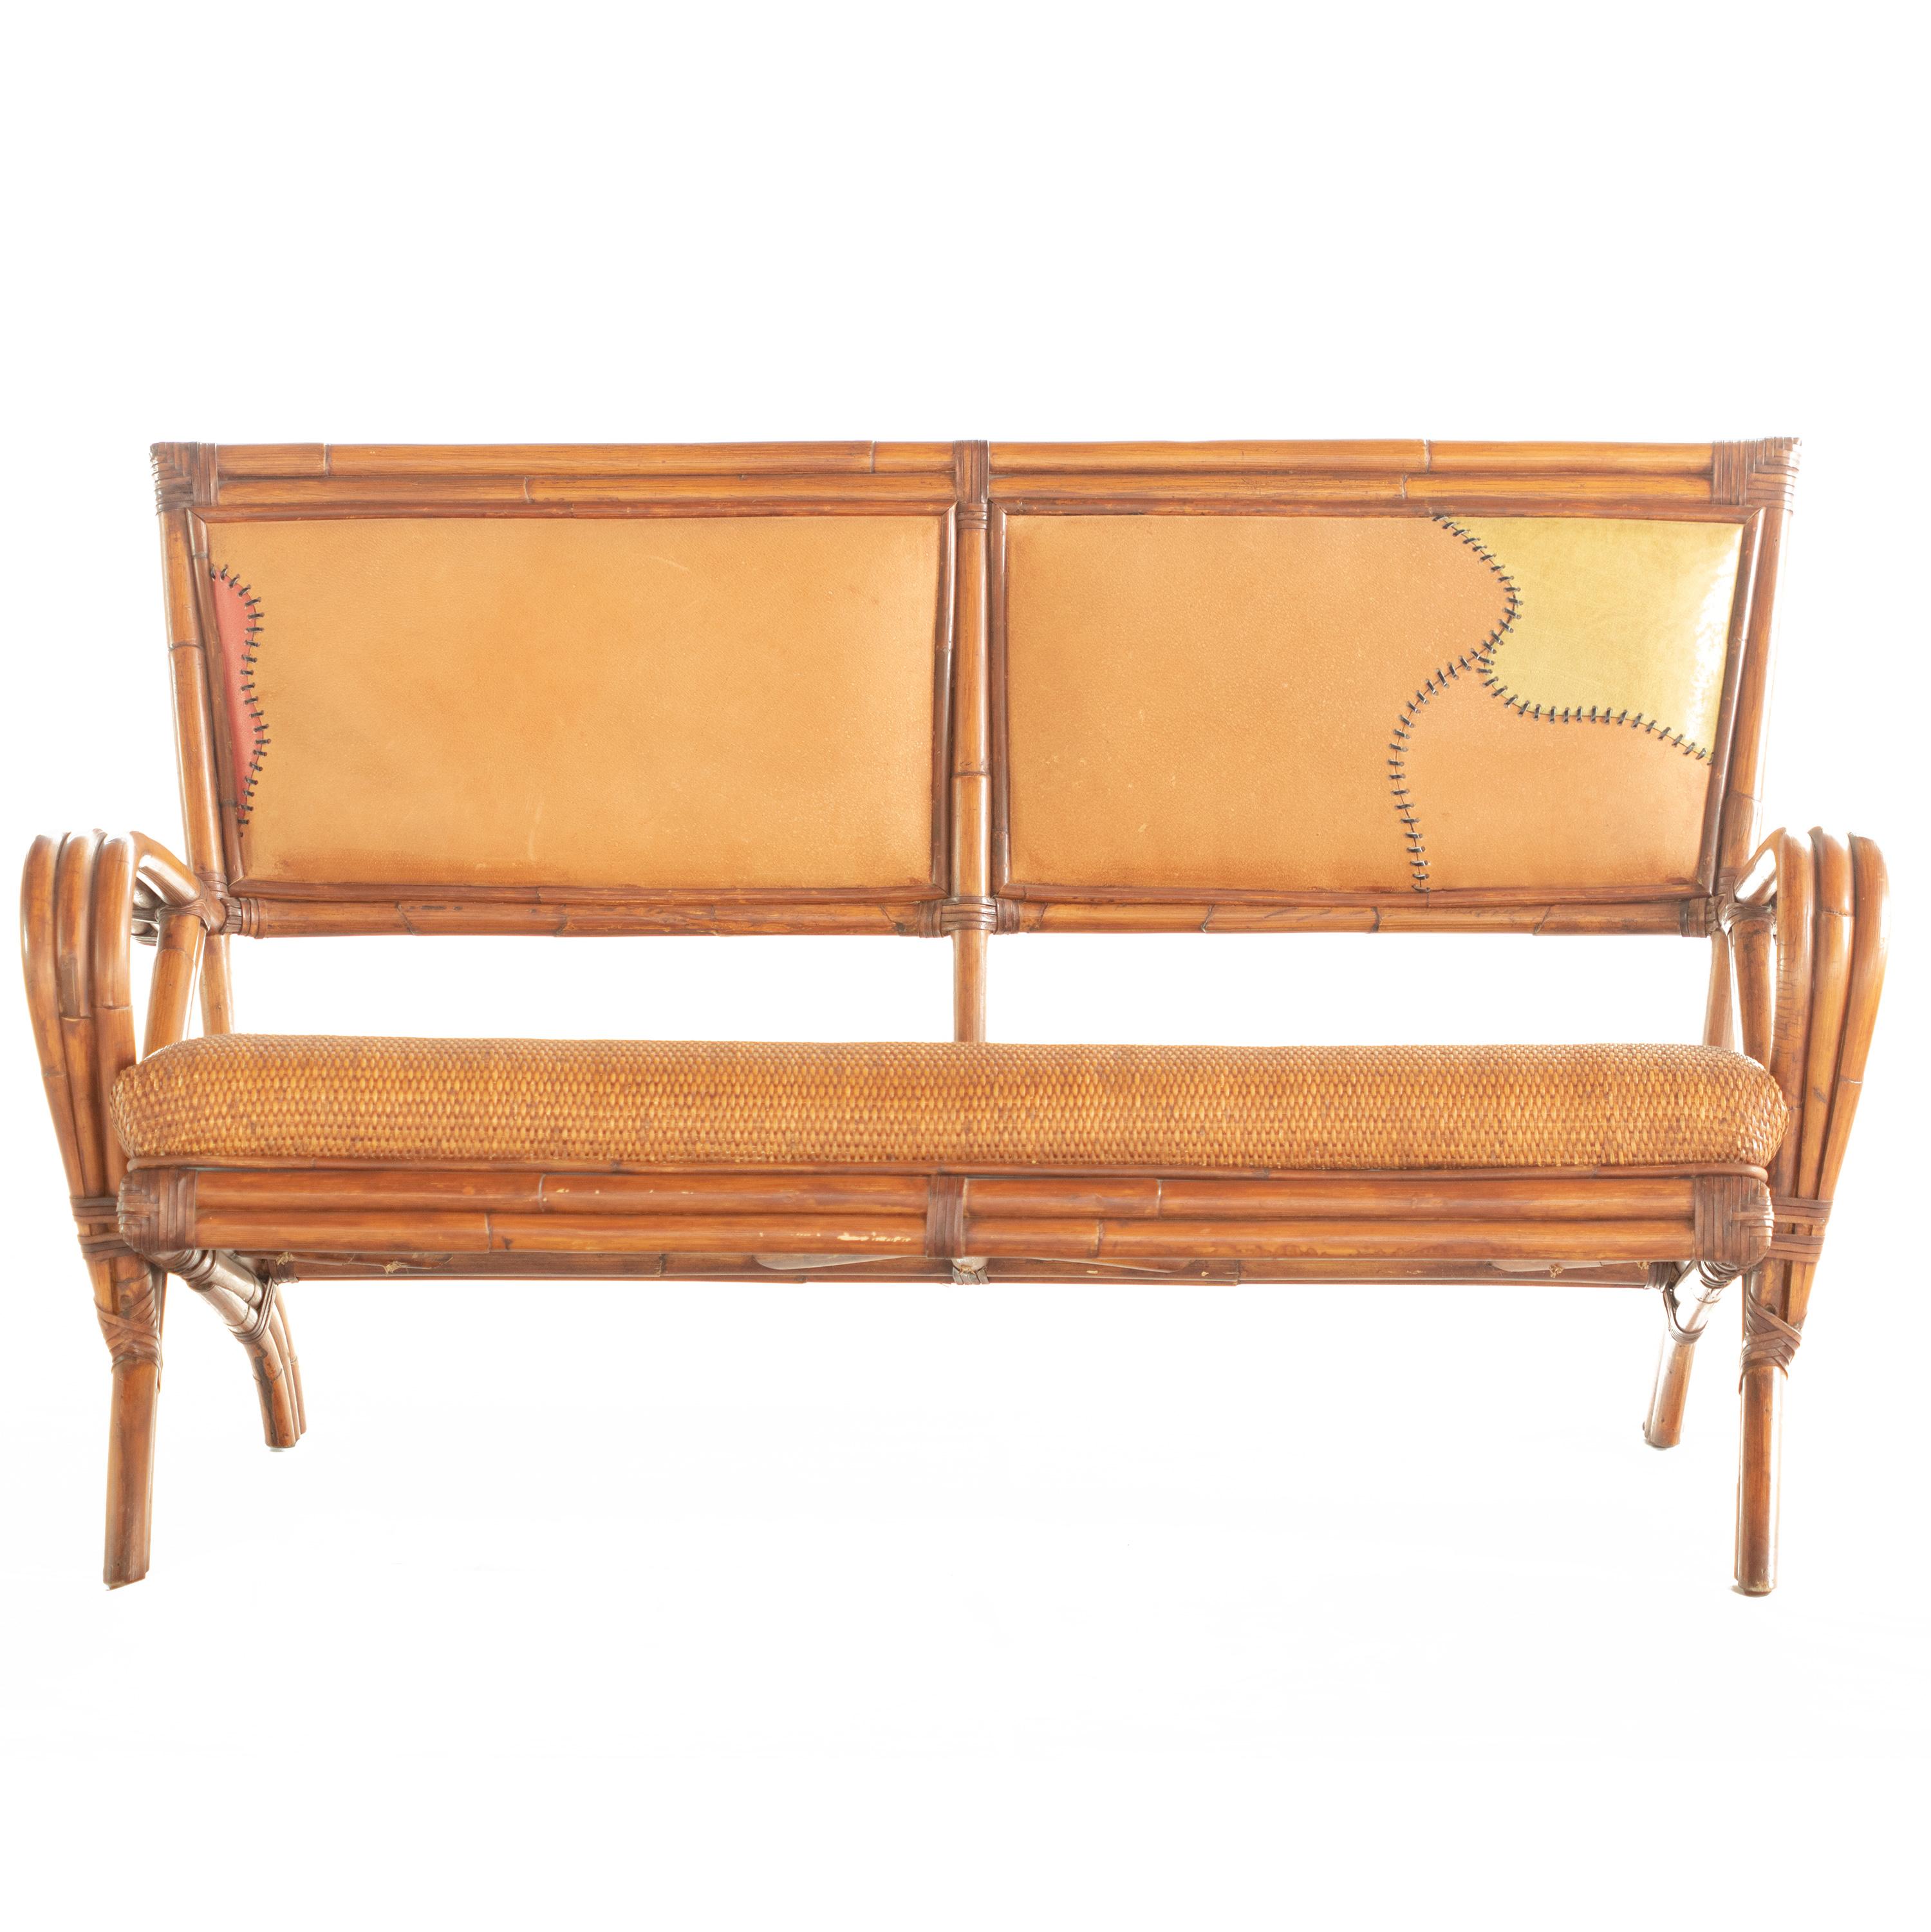 Modern straight sofa (2 seats) designed by Ramon Castellano (spanish designer), stamped for Kalma in Bamboo Wood, 20th Century. Collapsible rattan base reinforced with wrought iron. Chair is framed in rattan and crown is in wood. Bindings in